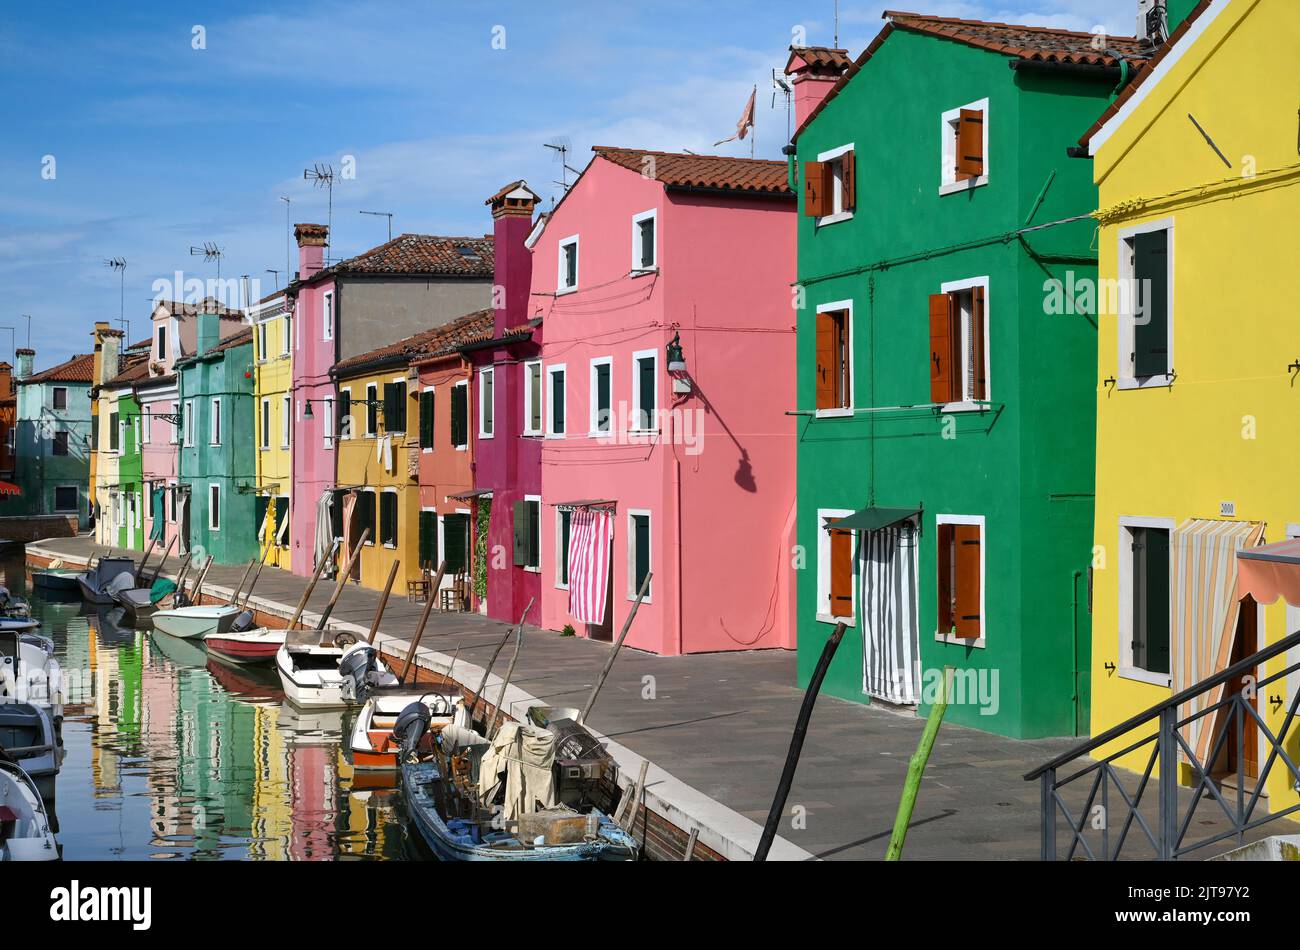 Boats floating on calm canal water near multicolored houses against blue sky on sunny day on street of Burano Island in Italy Stock Photo